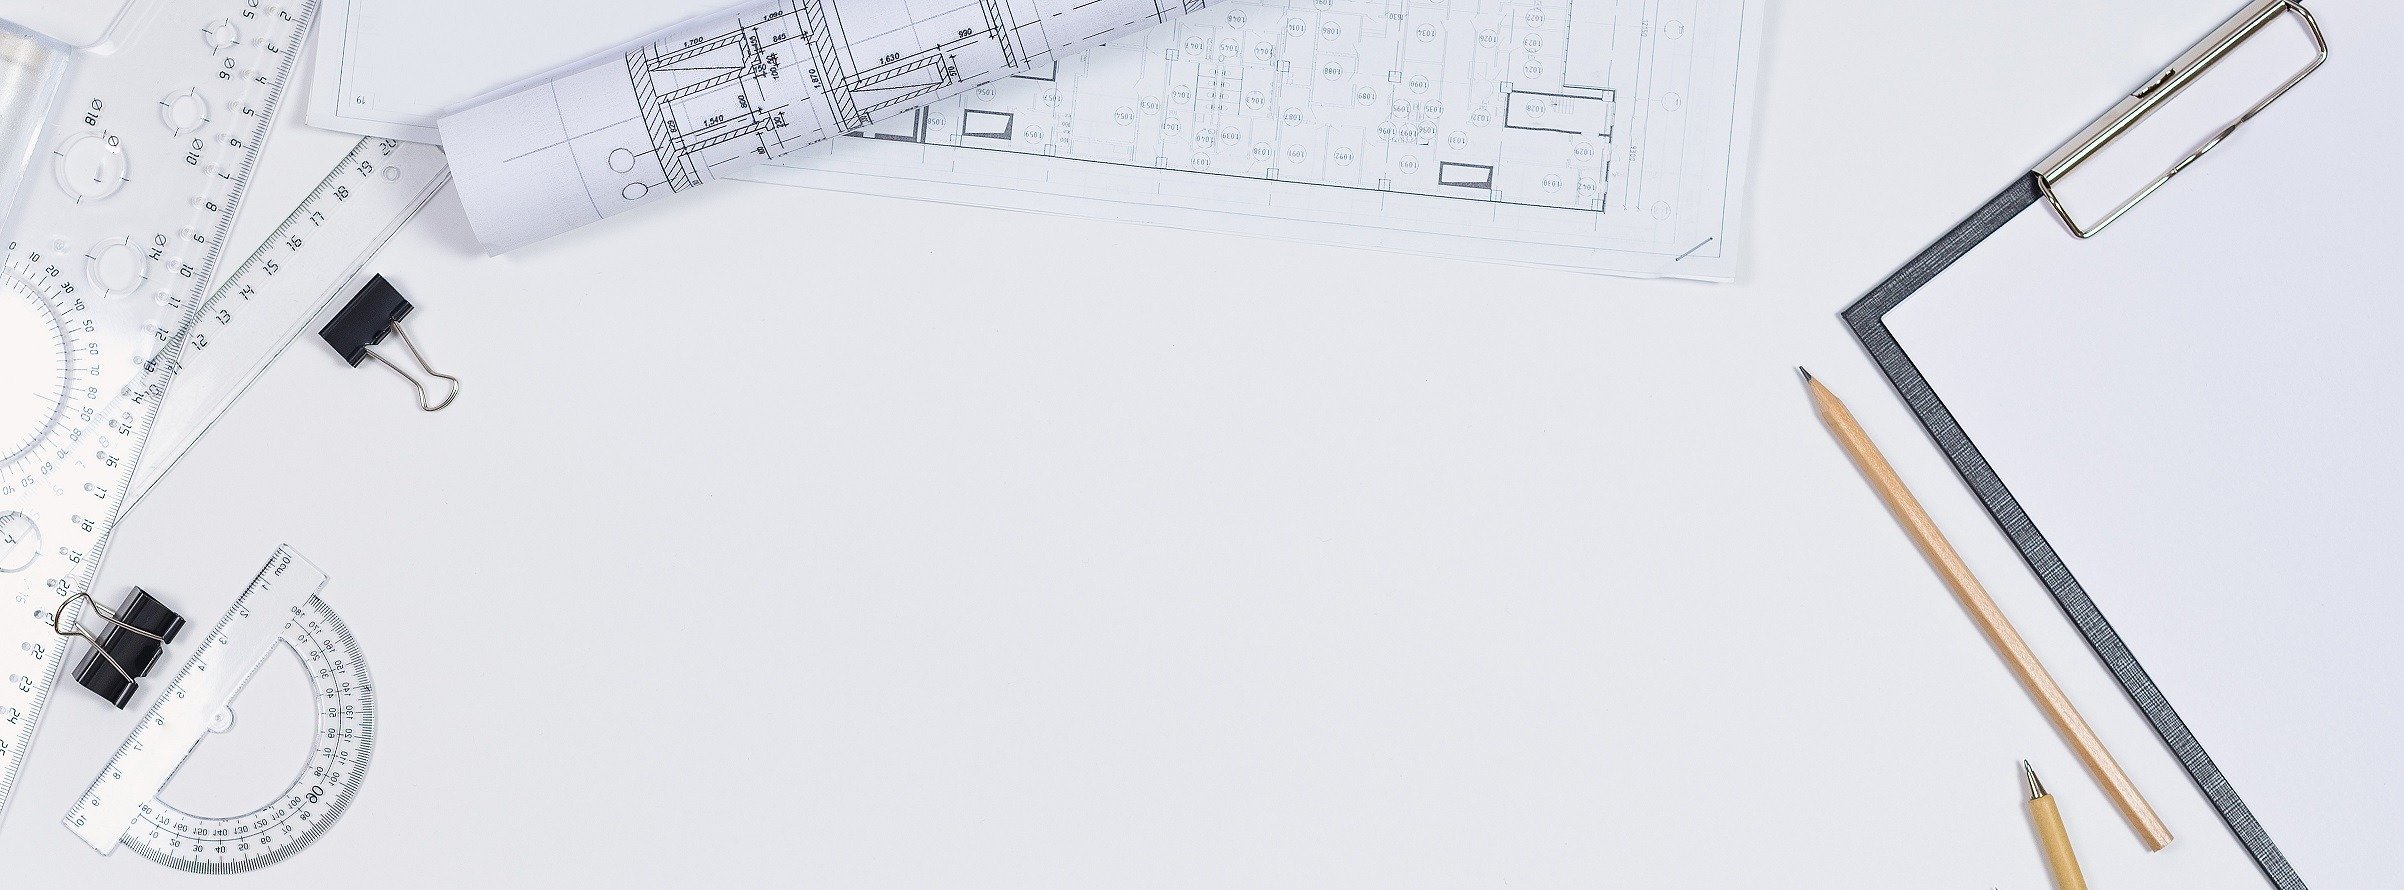 Architectural plans, pencil and ruler on the table. Working surface. Place for your text. View from above.